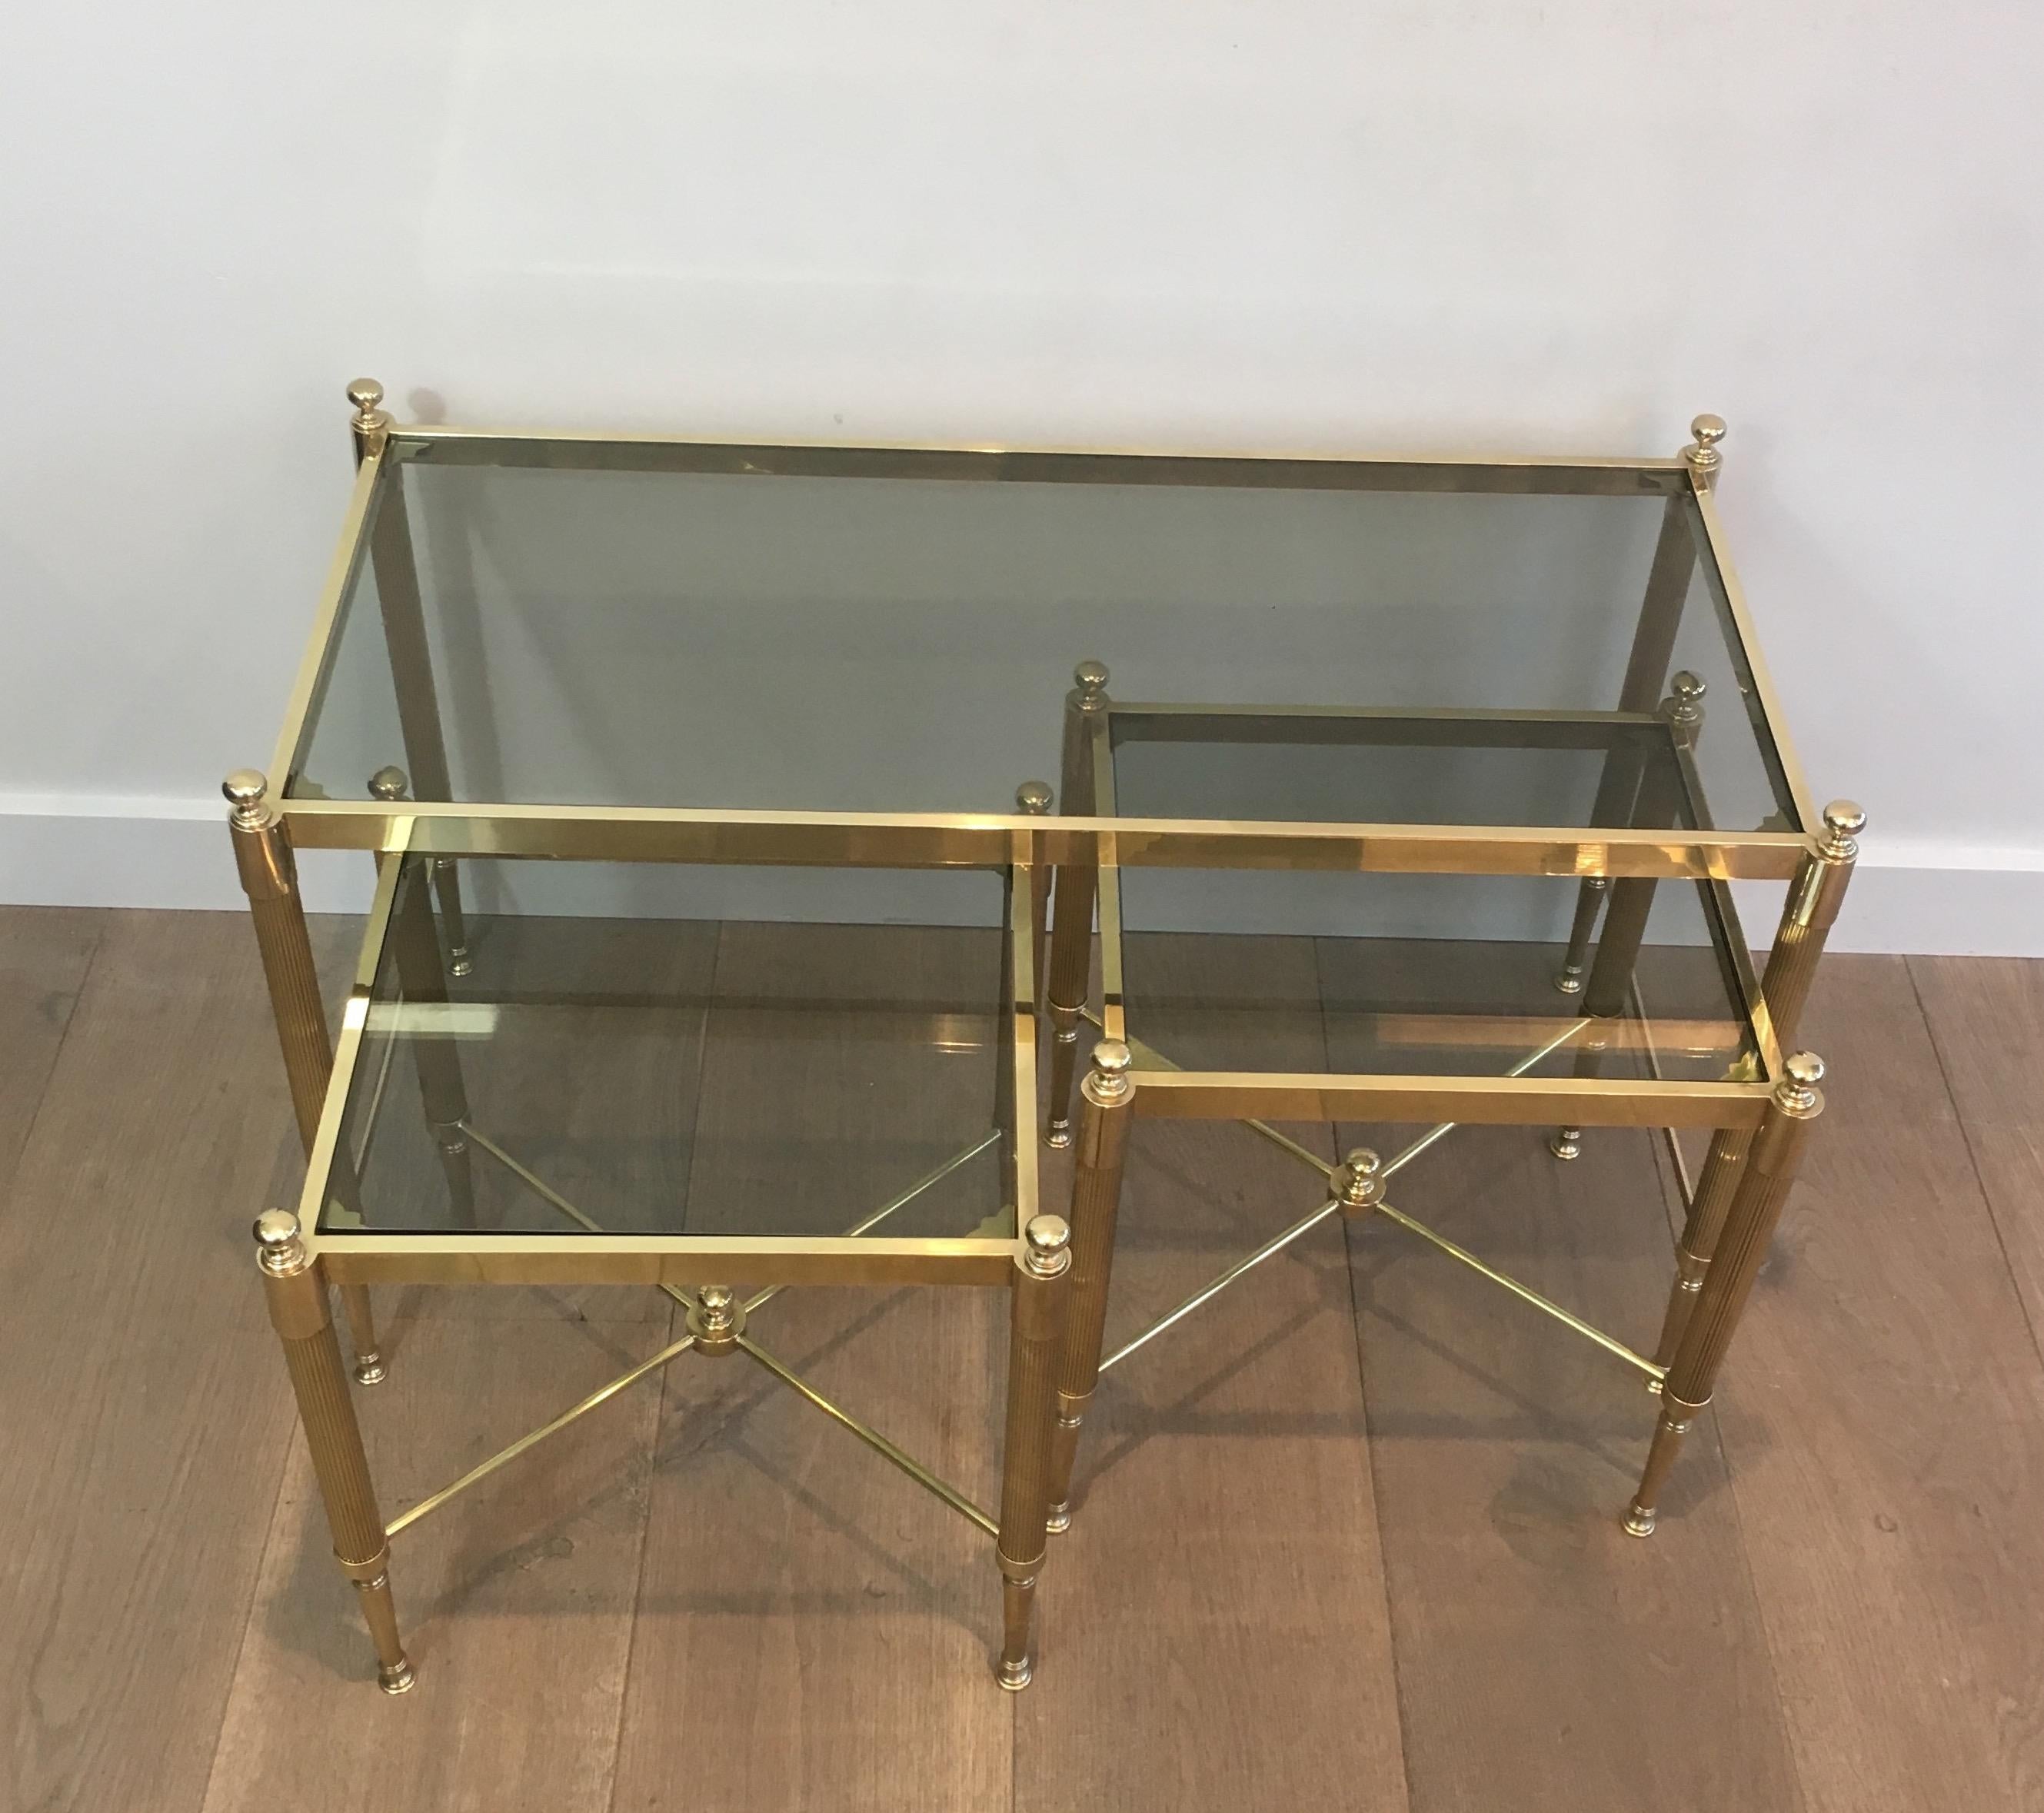 Tripartite Brass Coffee Table made of a Main Table and 2 Nesting Side Tables 10